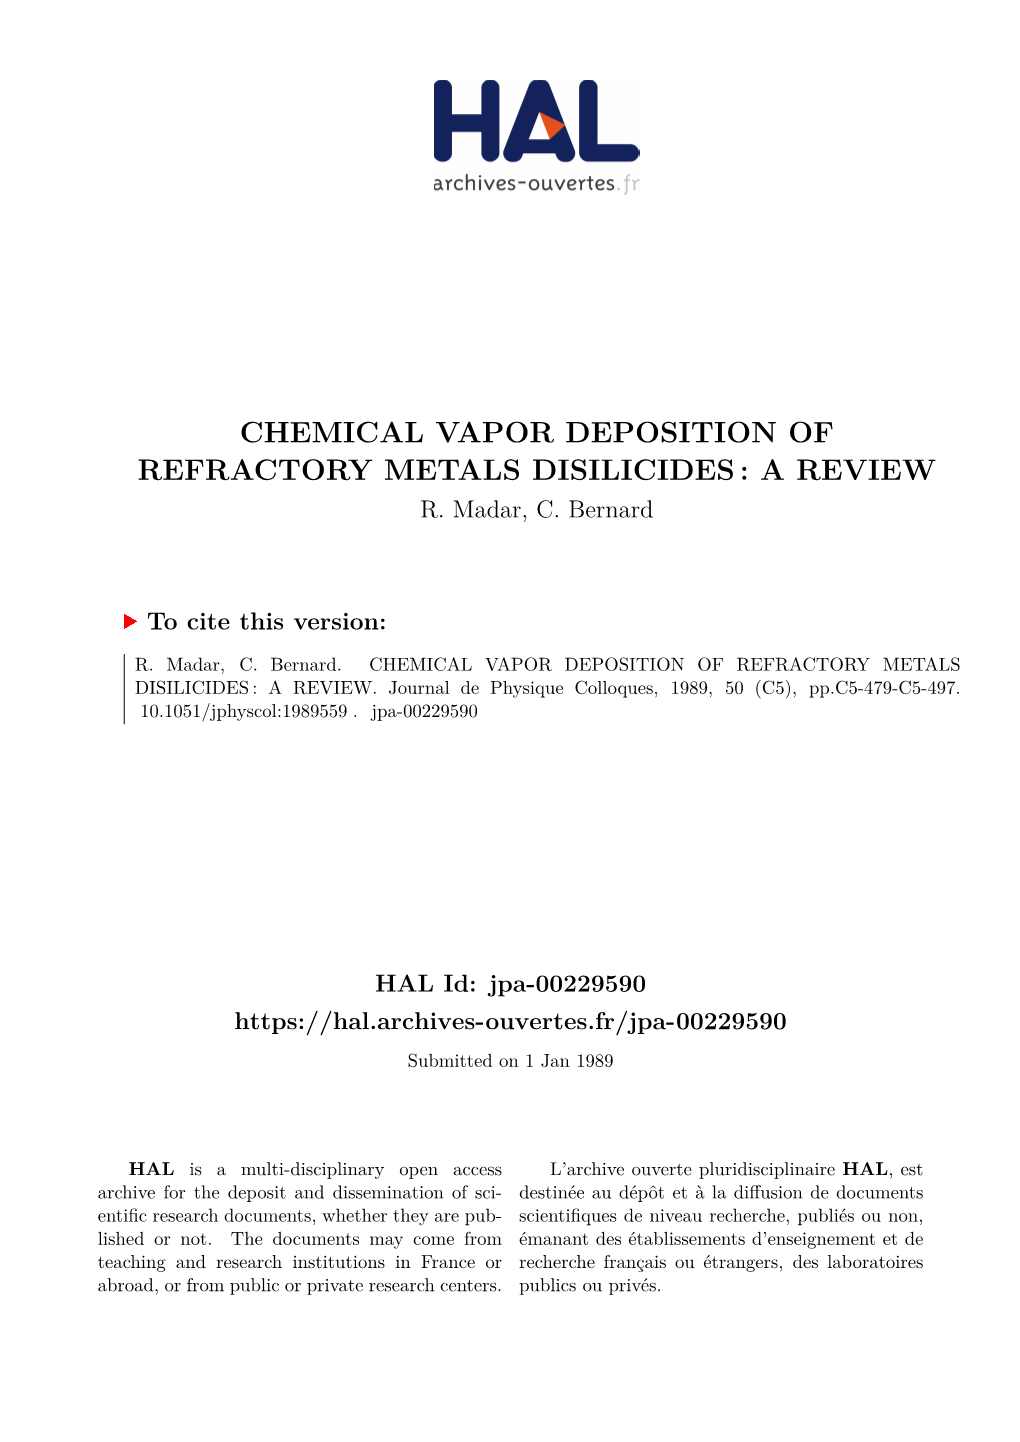 Chemical Vapor Deposition of Refractory Metals Disilicides : a Review R